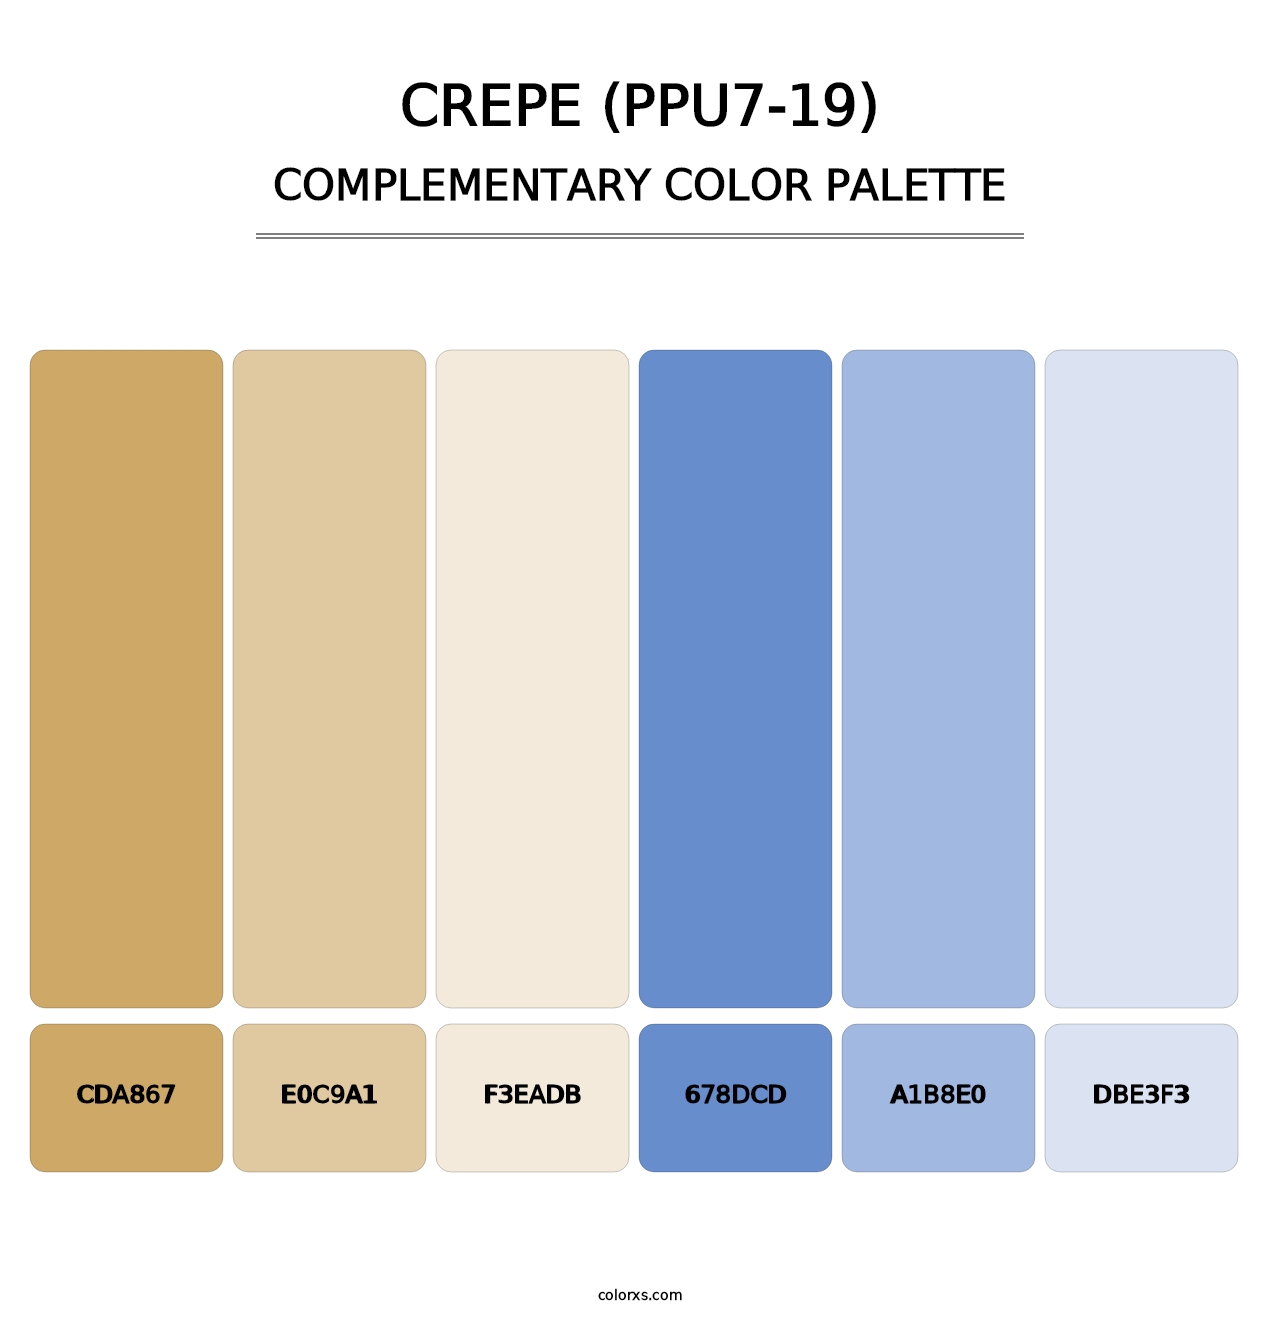 Crepe (PPU7-19) - Complementary Color Palette